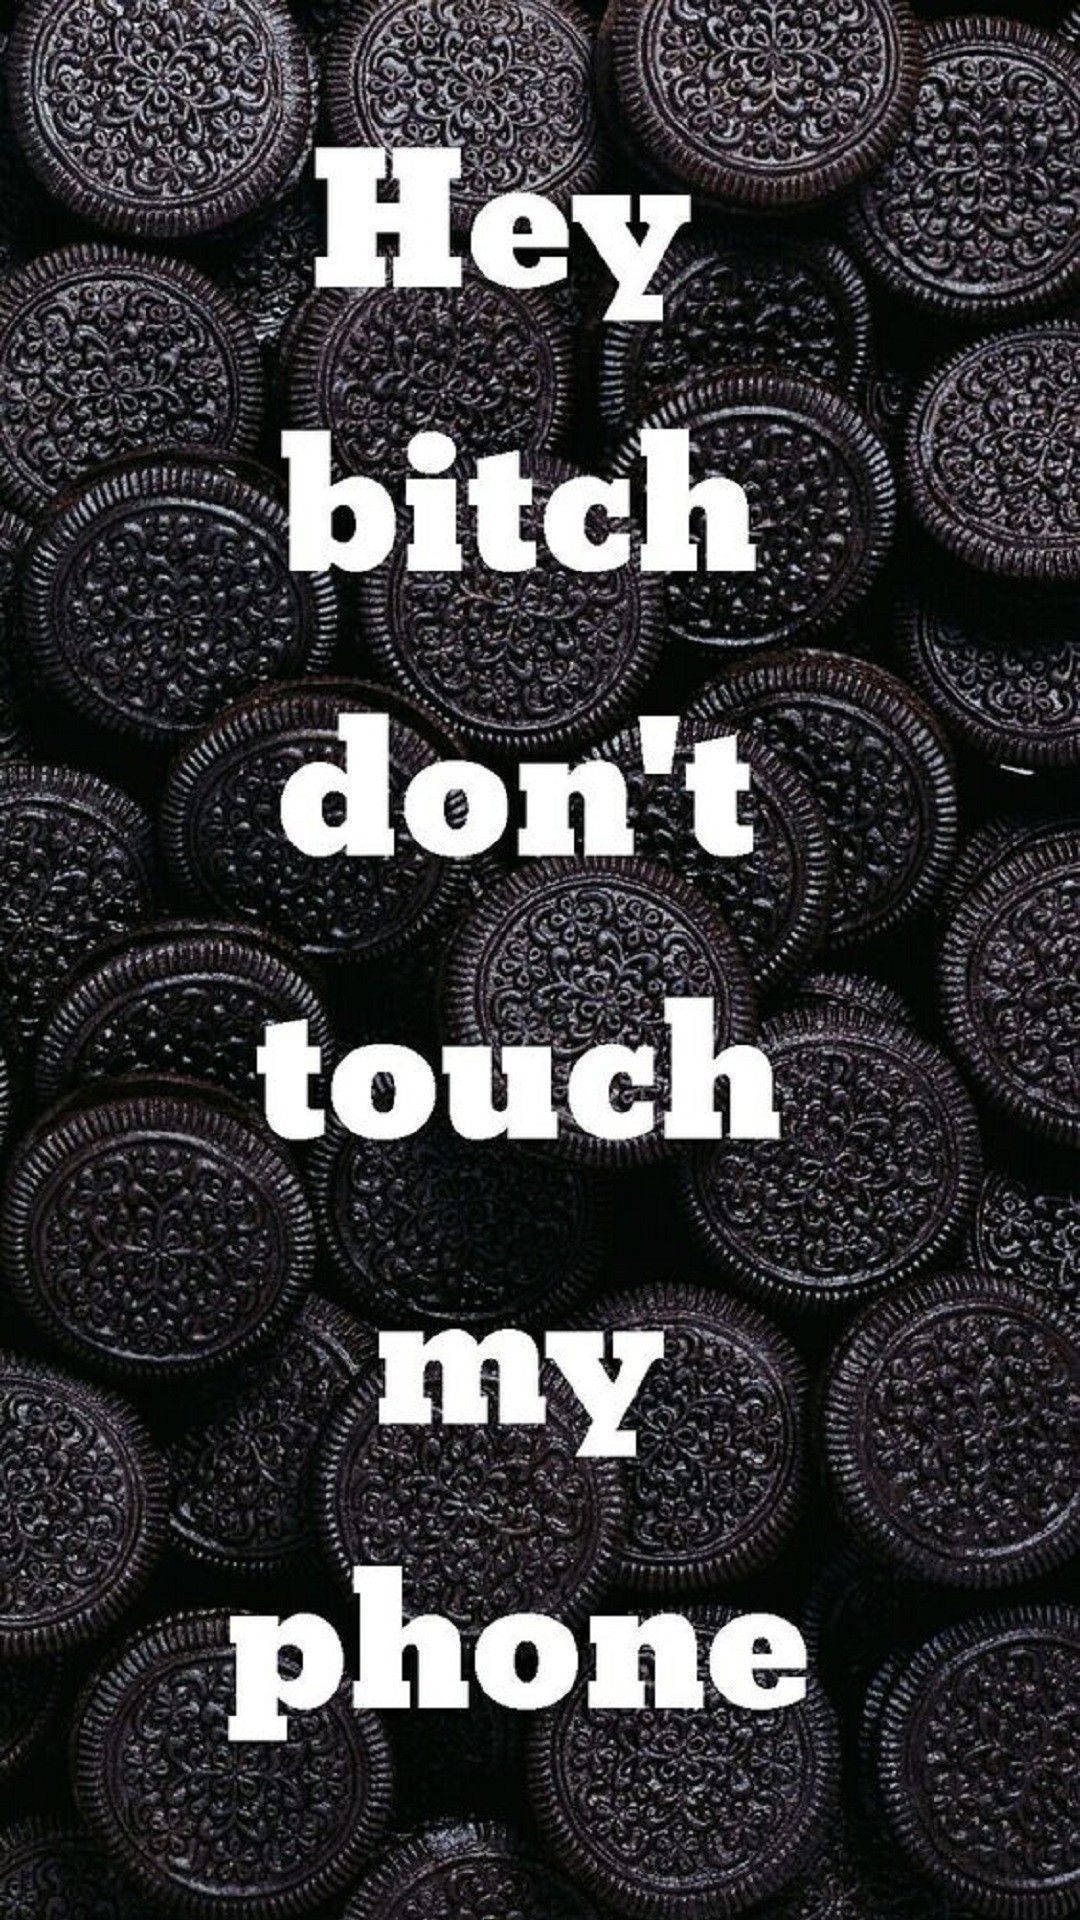 A pile of oreos with the words hey bitch don't touch my phone - Oreo